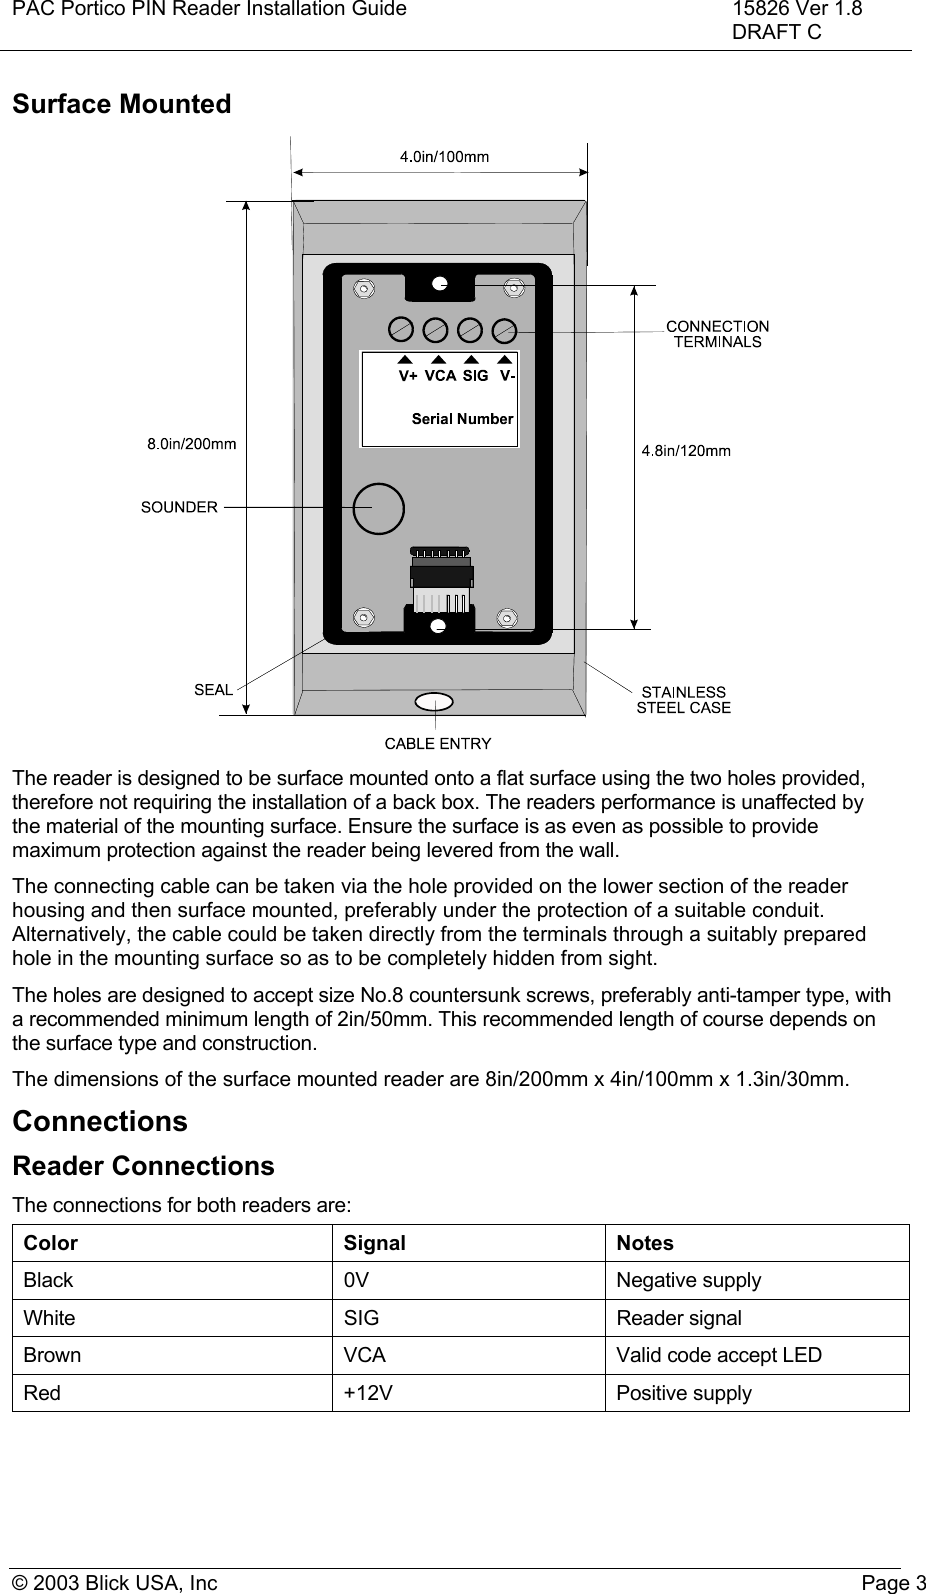 PAC Portico PIN Reader Installation Guide 15826 Ver 1.8DRAFT C© 2003 Blick USA, Inc Page 3Surface MountedThe reader is designed to be surface mounted onto a flat surface using the two holes provided,therefore not requiring the installation of a back box. The readers performance is unaffected bythe material of the mounting surface. Ensure the surface is as even as possible to providemaximum protection against the reader being levered from the wall.The connecting cable can be taken via the hole provided on the lower section of the readerhousing and then surface mounted, preferably under the protection of a suitable conduit.Alternatively, the cable could be taken directly from the terminals through a suitably preparedhole in the mounting surface so as to be completely hidden from sight.The holes are designed to accept size No.8 countersunk screws, preferably anti-tamper type, witha recommended minimum length of 2in/50mm. This recommended length of course depends onthe surface type and construction.The dimensions of the surface mounted reader are 8in/200mm x 4in/100mm x 1.3in/30mm.ConnectionsReader ConnectionsThe connections for both readers are:Color Signal NotesBlack 0V Negative supplyWhite SIG Reader signalBrown VCA Valid code accept LEDRed +12V Positive supply